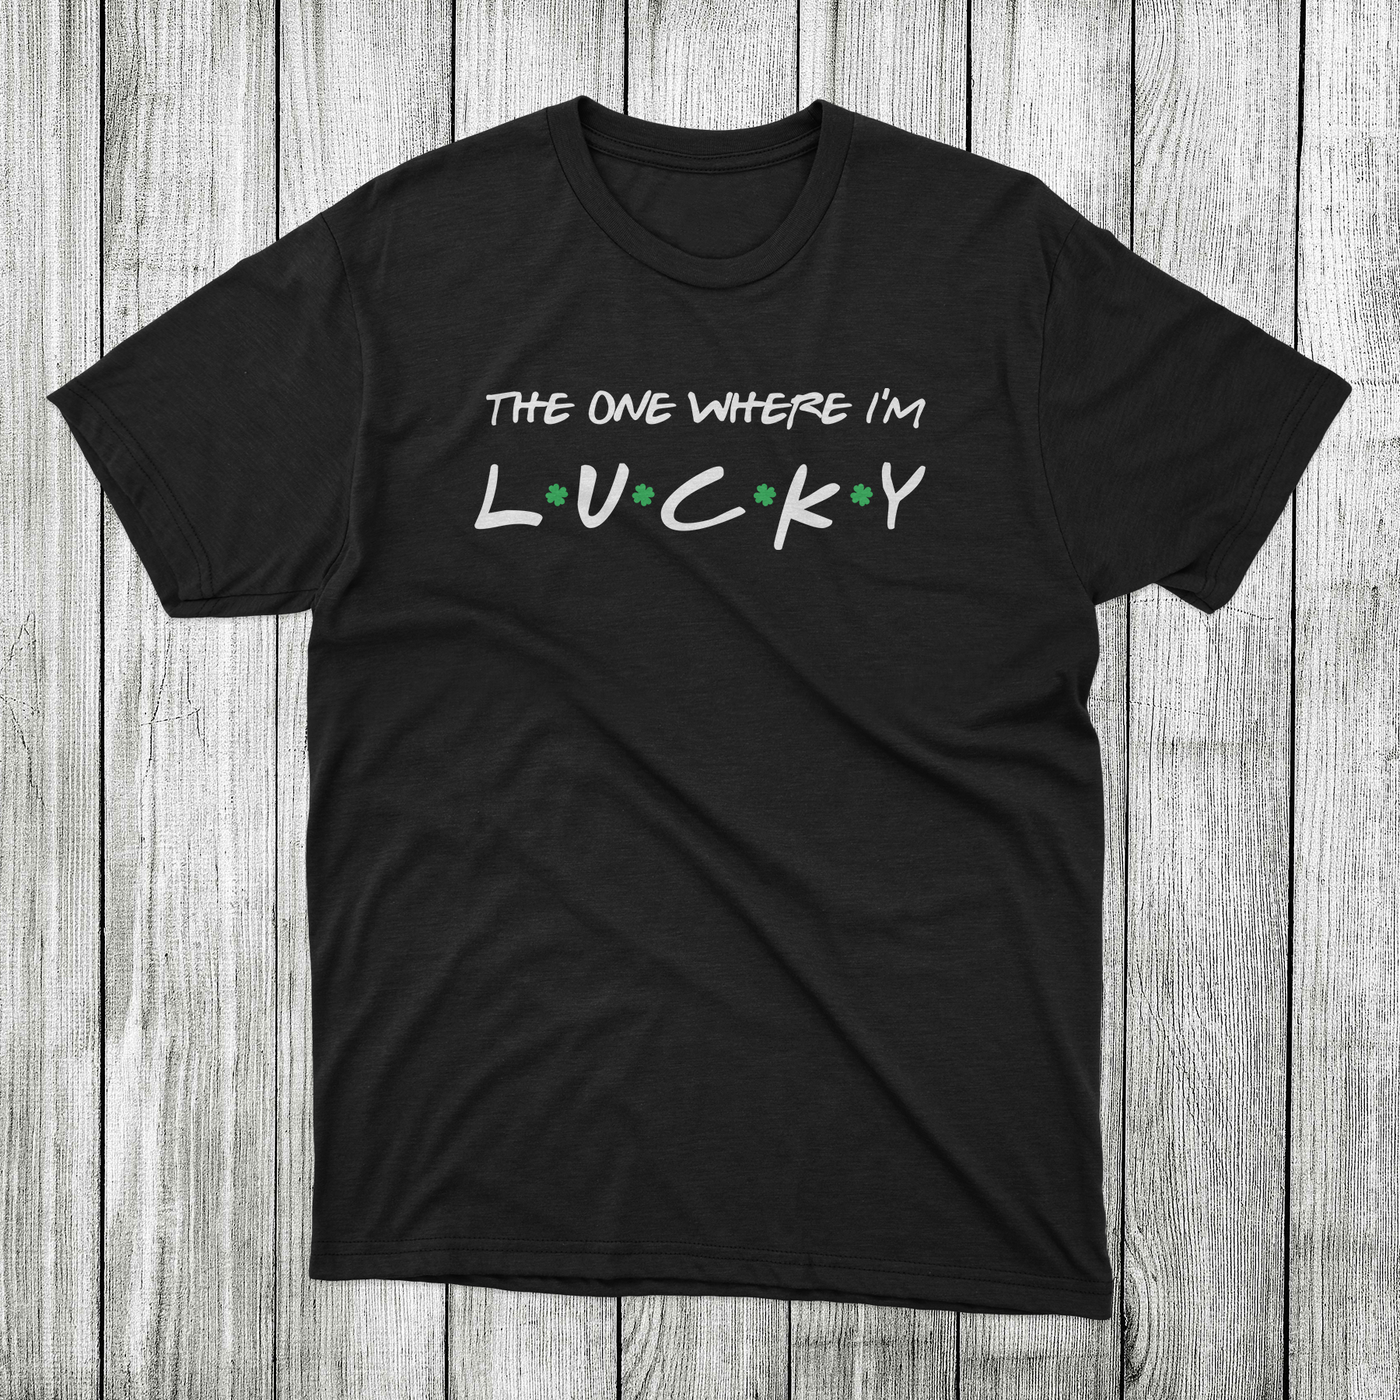 Daydream Tees The One Where I'm Lucky Black